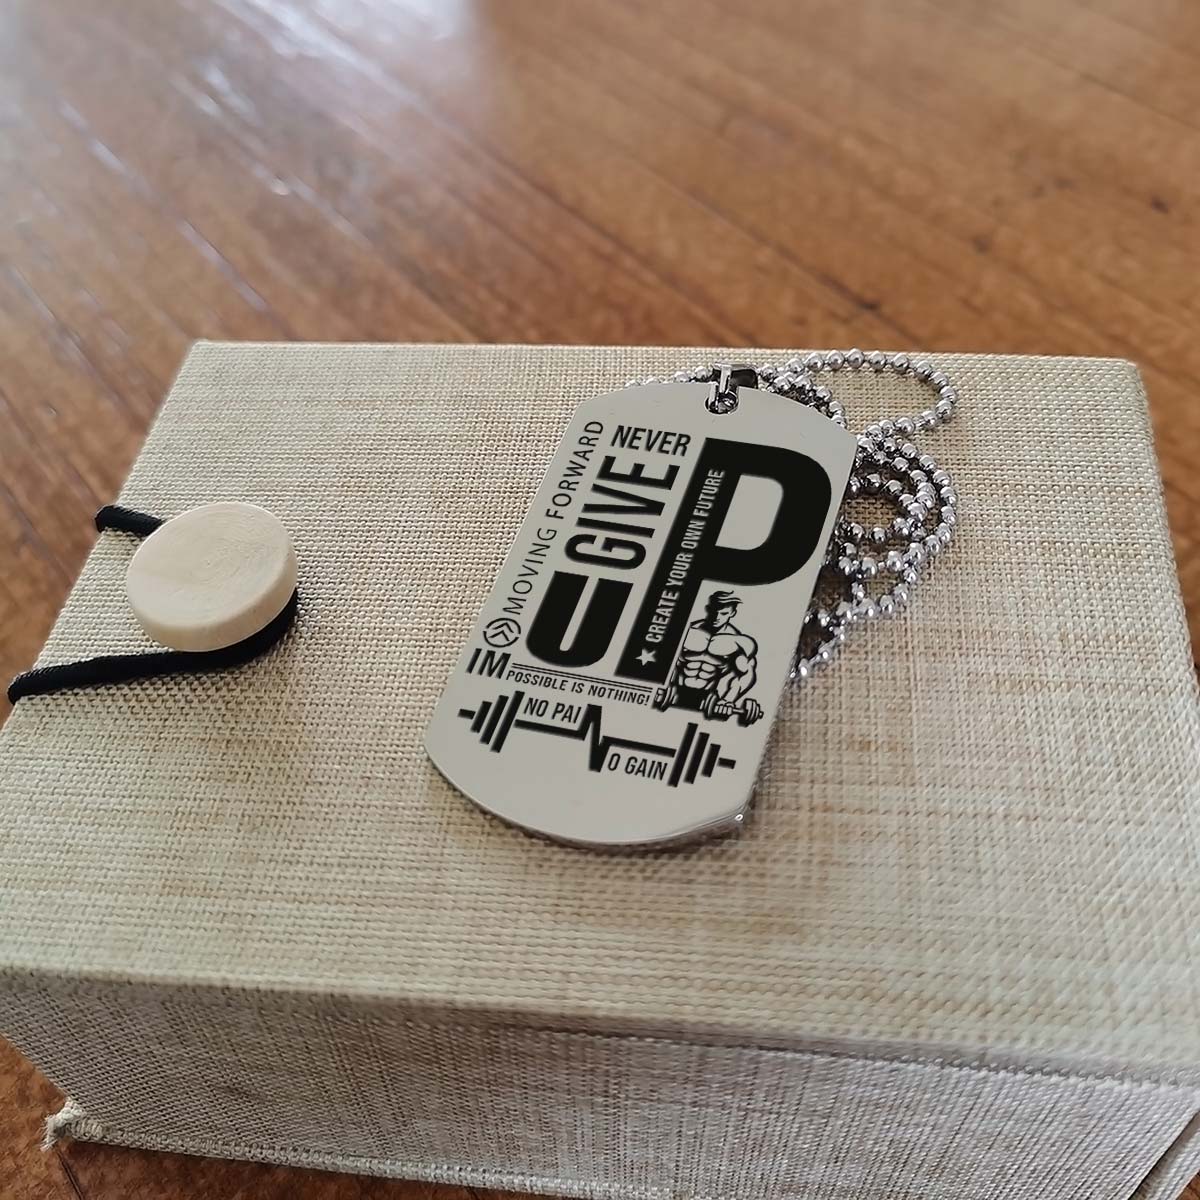 Fitness Man - Never Give Up - The Pain You Feel Today Is The Strength You Feel Tomorrow - Gym - Fitness Center - Workout - Gym Dog Tag - Gym Necklace - Engrave Dog Tag